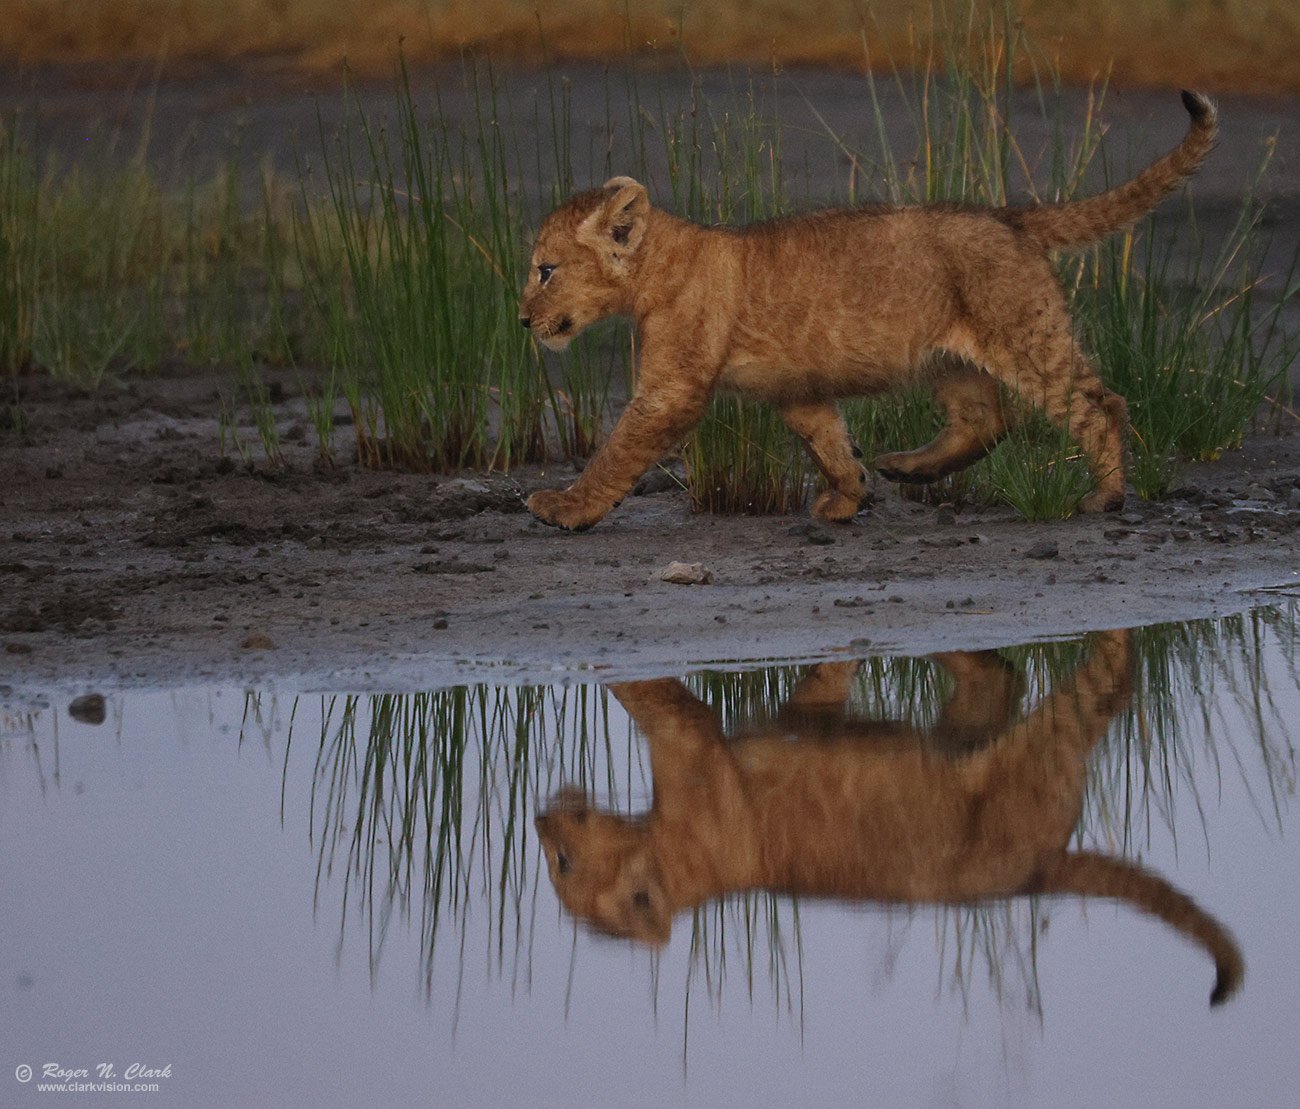 image lion-cub-running-reflection-c02-20-2024-4C3A1804-b-1300s.jpg is Copyrighted by Roger N. Clark, www.clarkvision.com